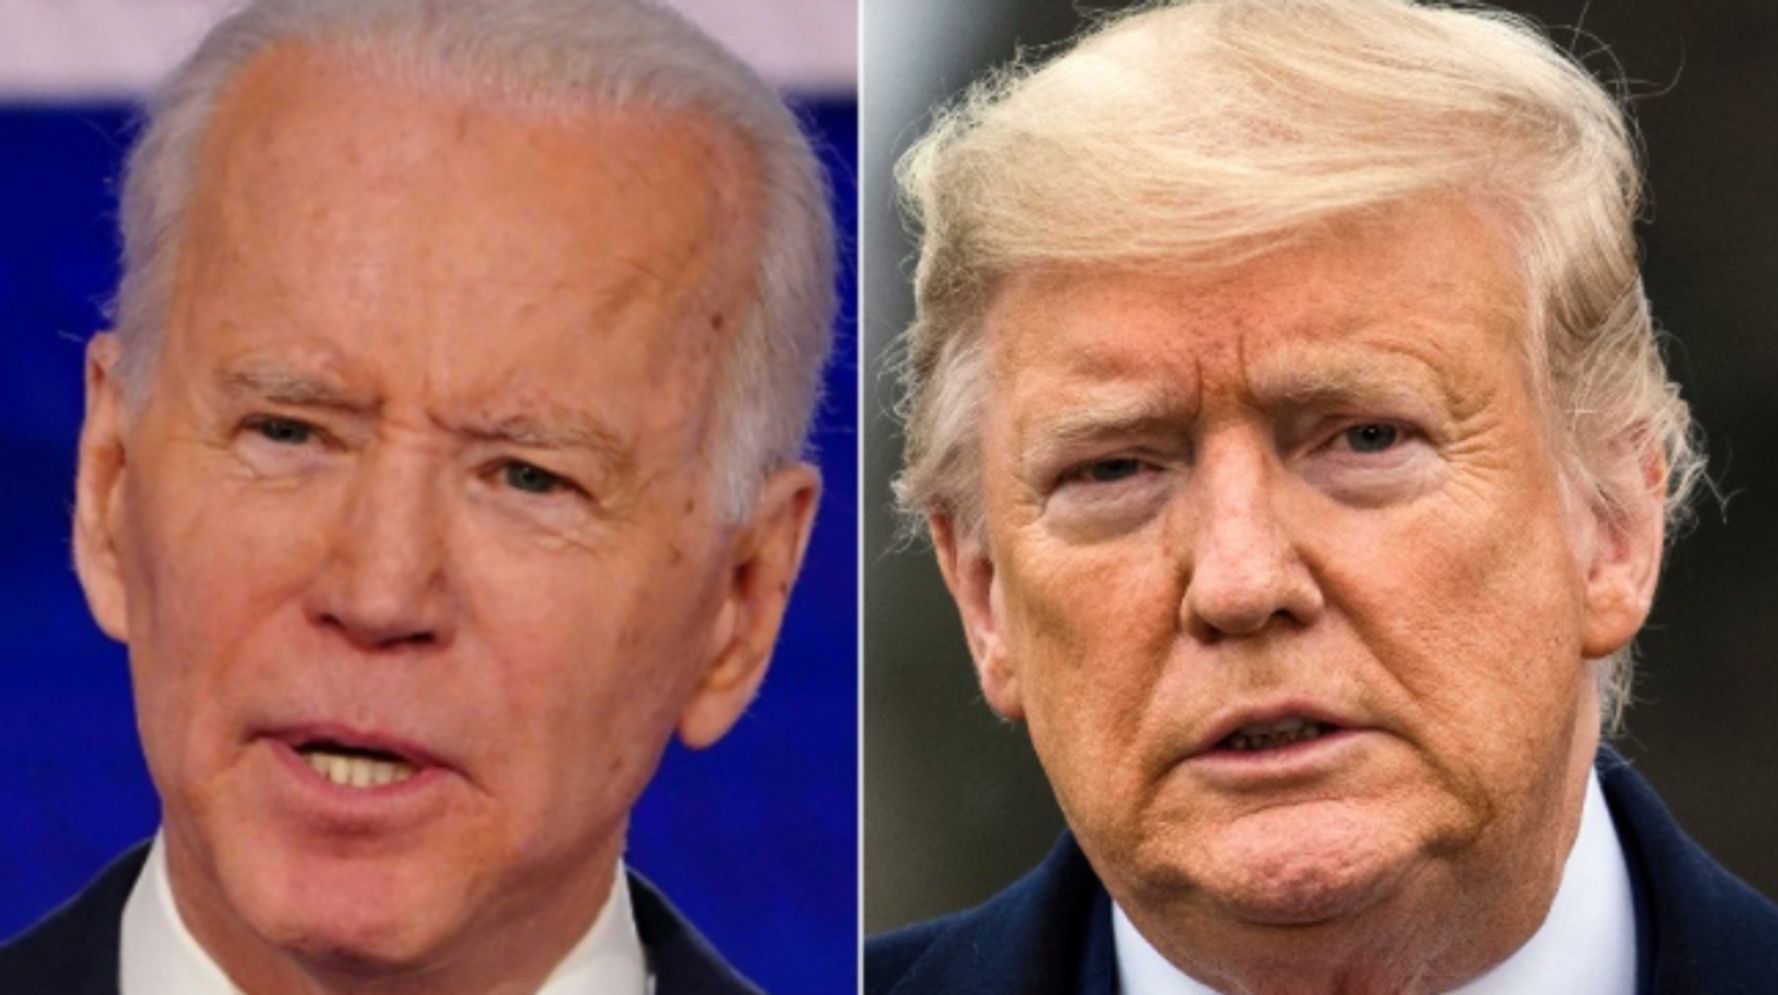 Donald Trump Will Lose One Of His Twitter Accounts To Joe Biden On Inauguration Day